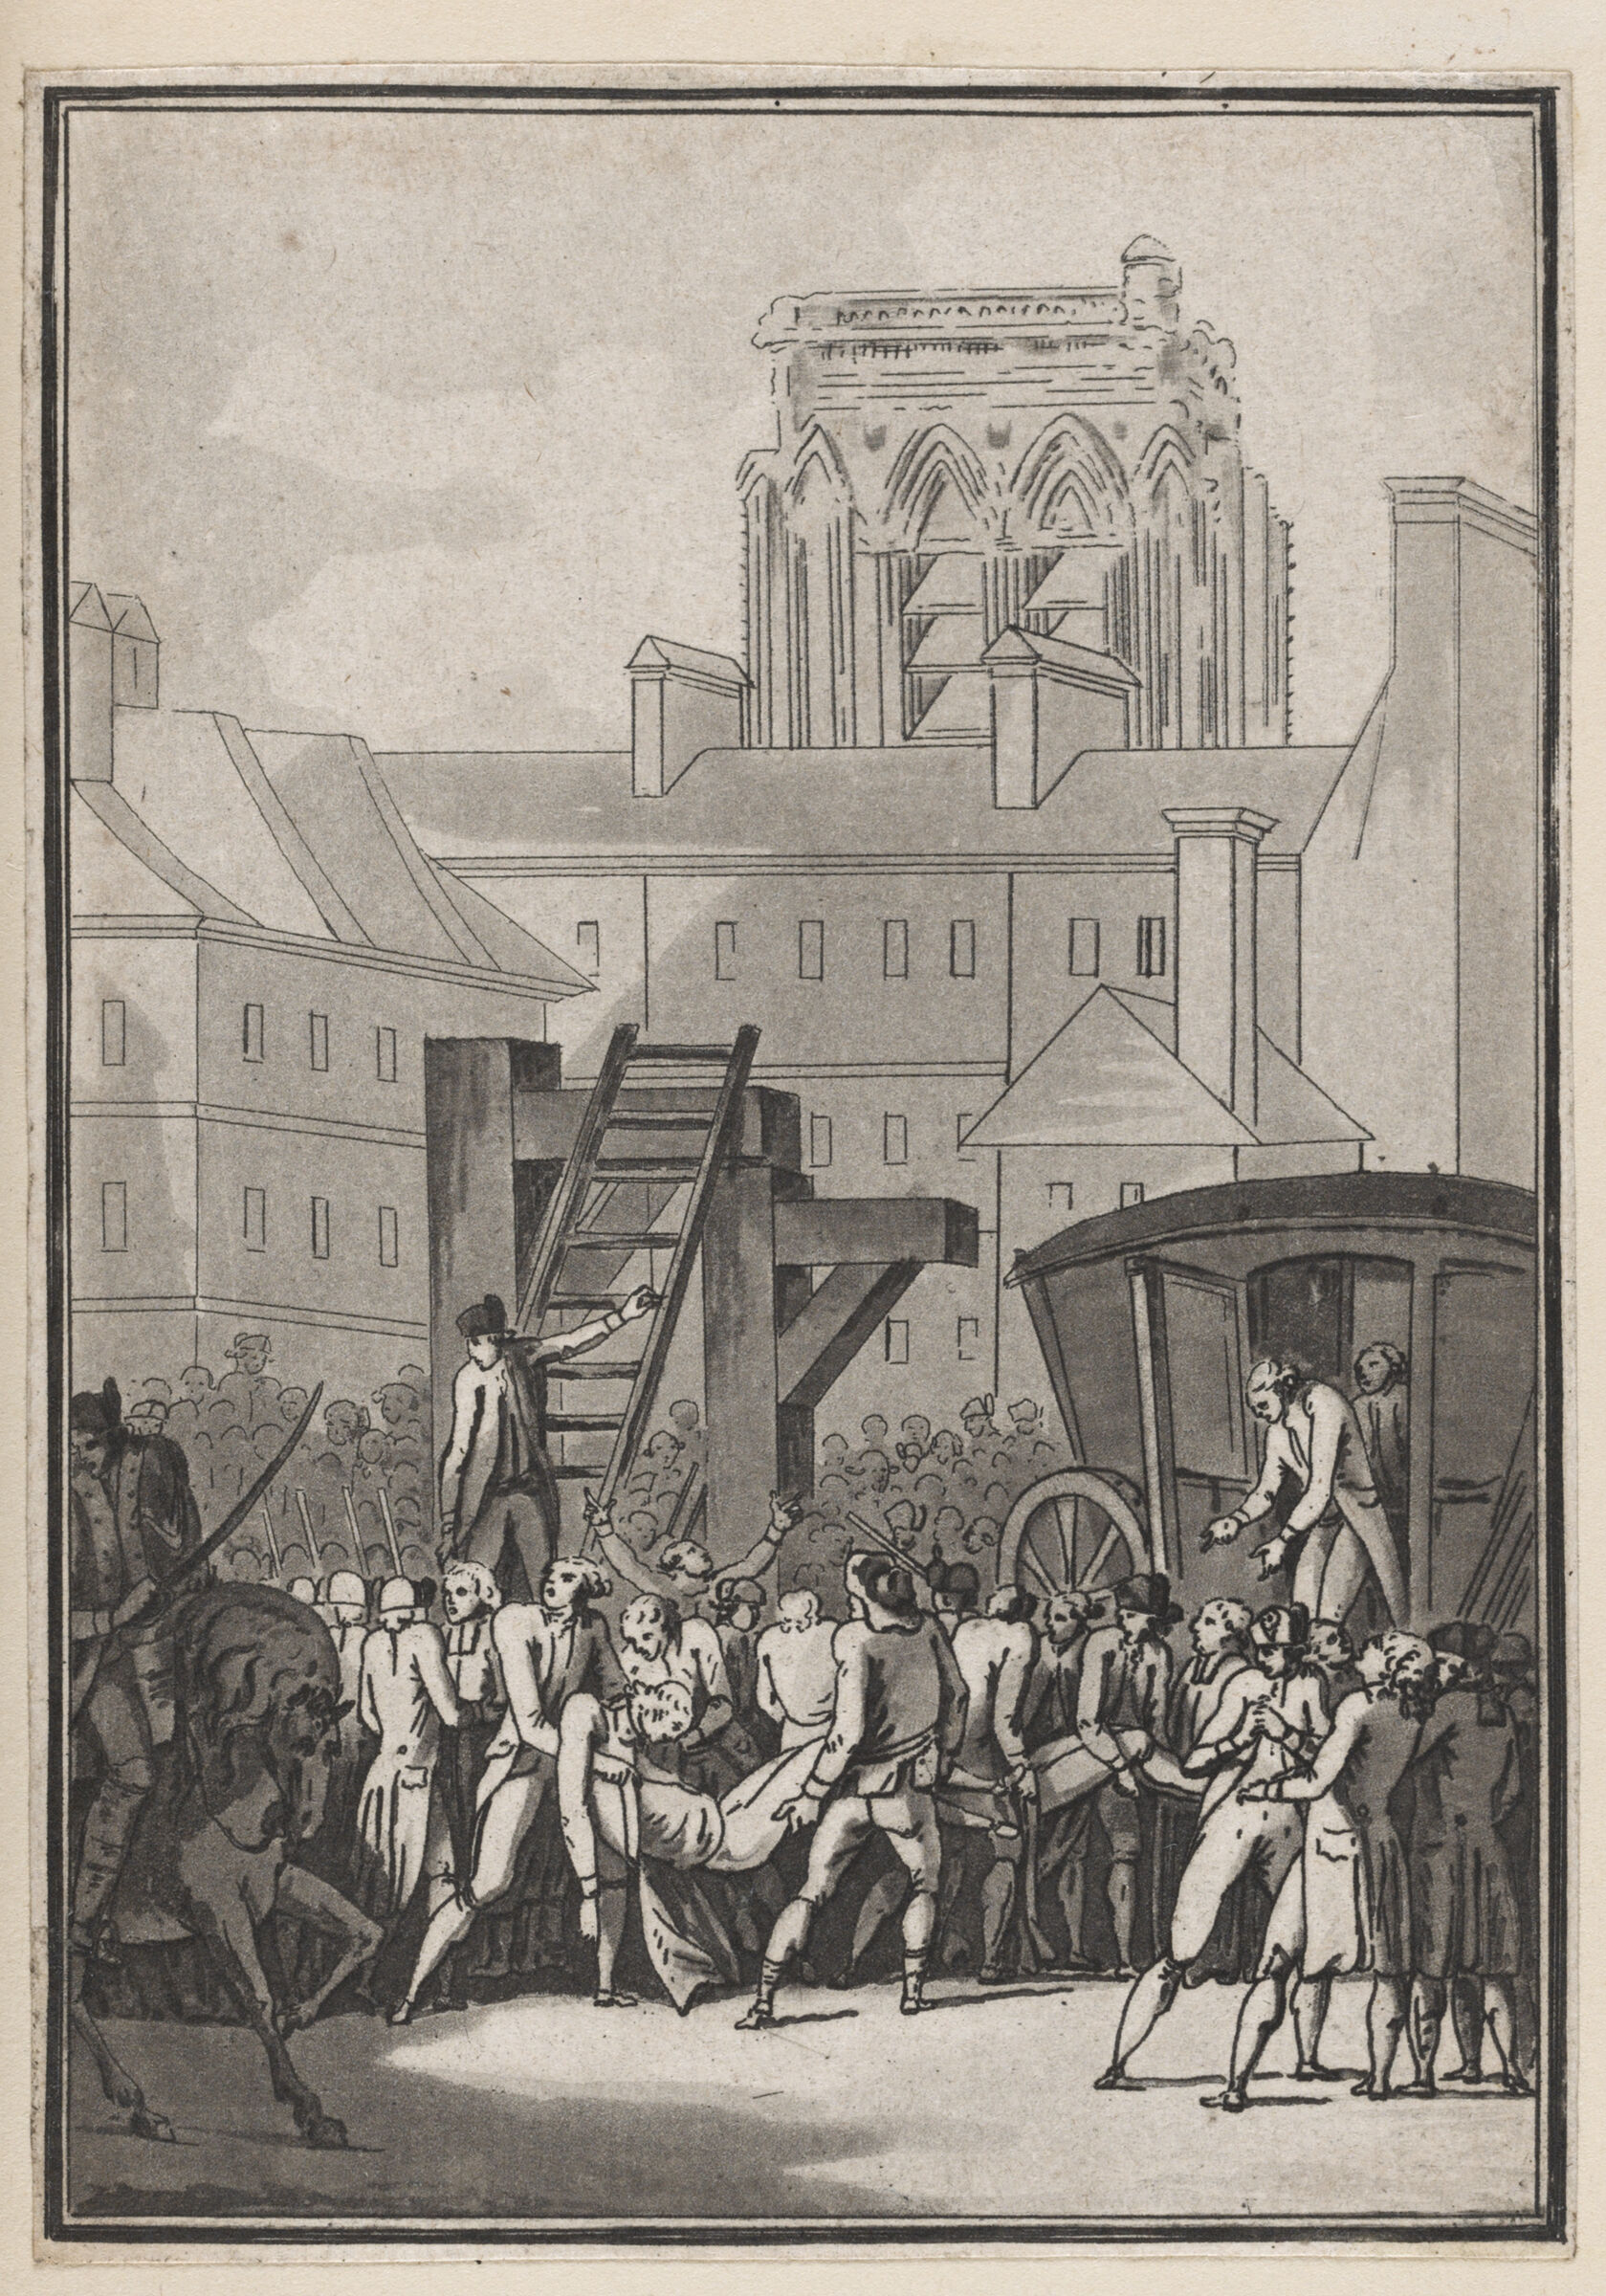 After The Execution Of The Two Agasse Brothers, Their Bodies Are Returned To Their Families (8 February 1790)